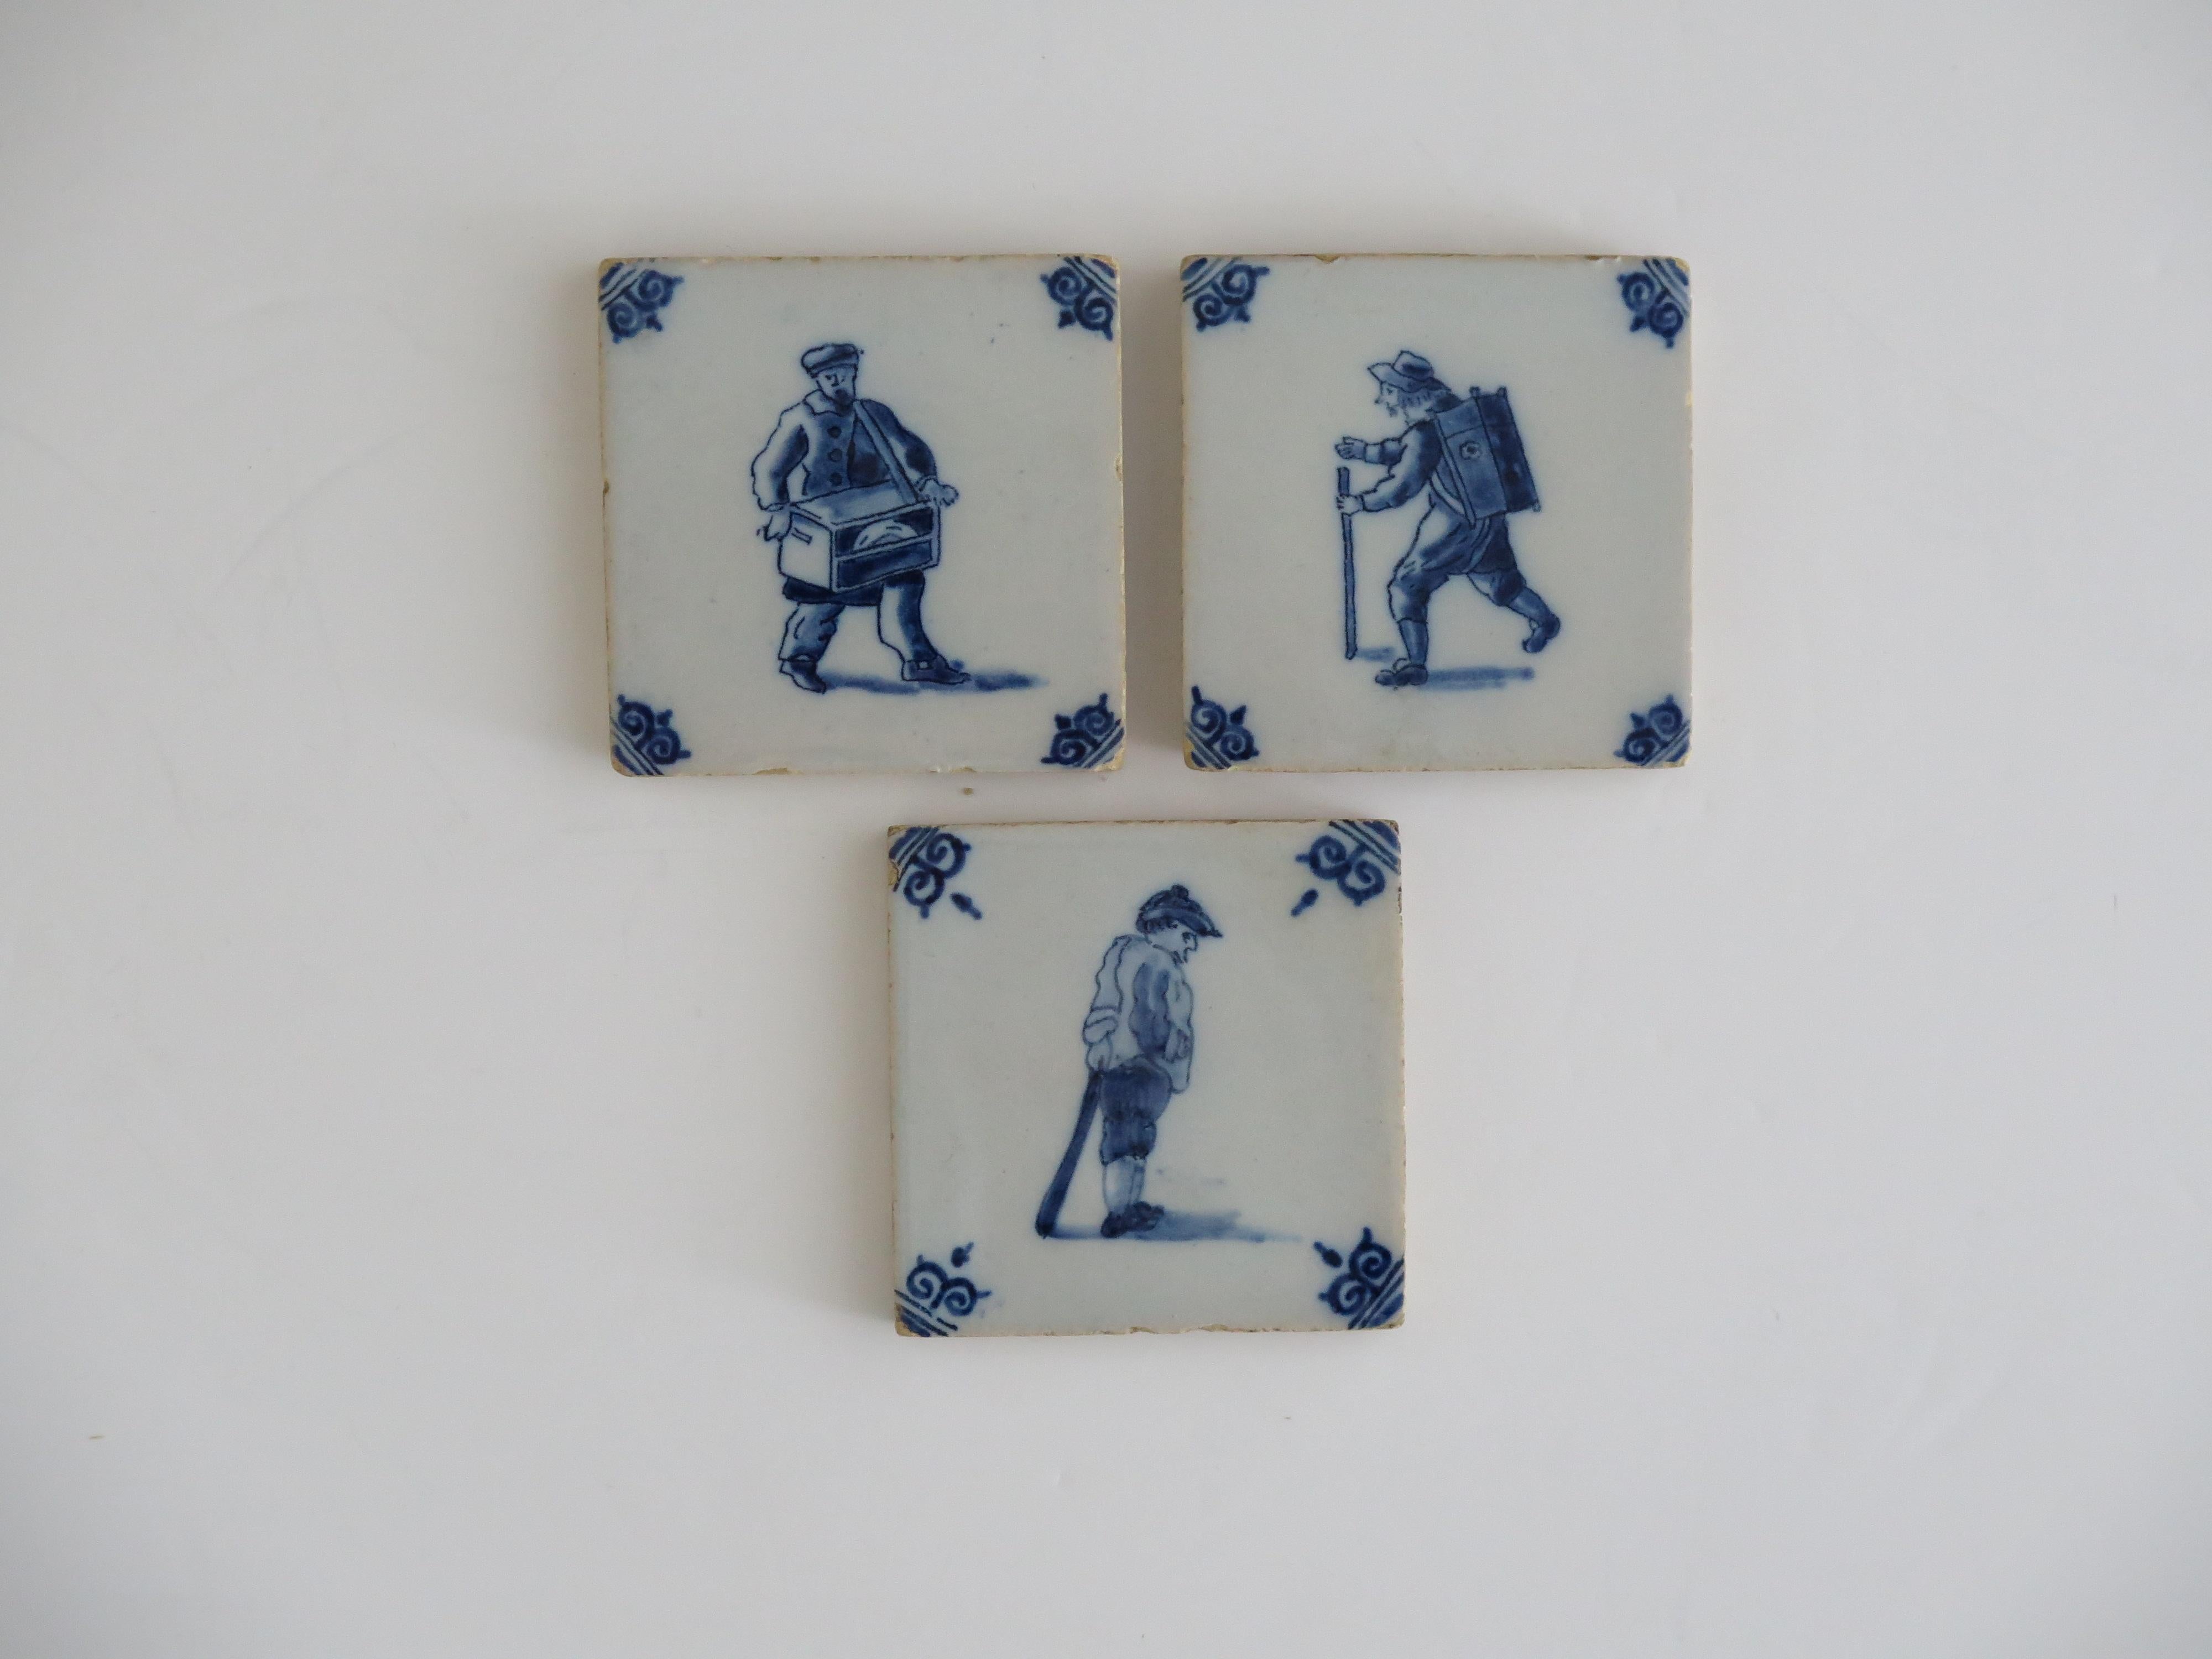 These are a very decorative set of Three small ceramic wall tiles, with a Blue and White figural scene, dating to the later part of the 18th century or early in the 19th Century.

All three tiles are nominally 3 inches square and 3/8 inch